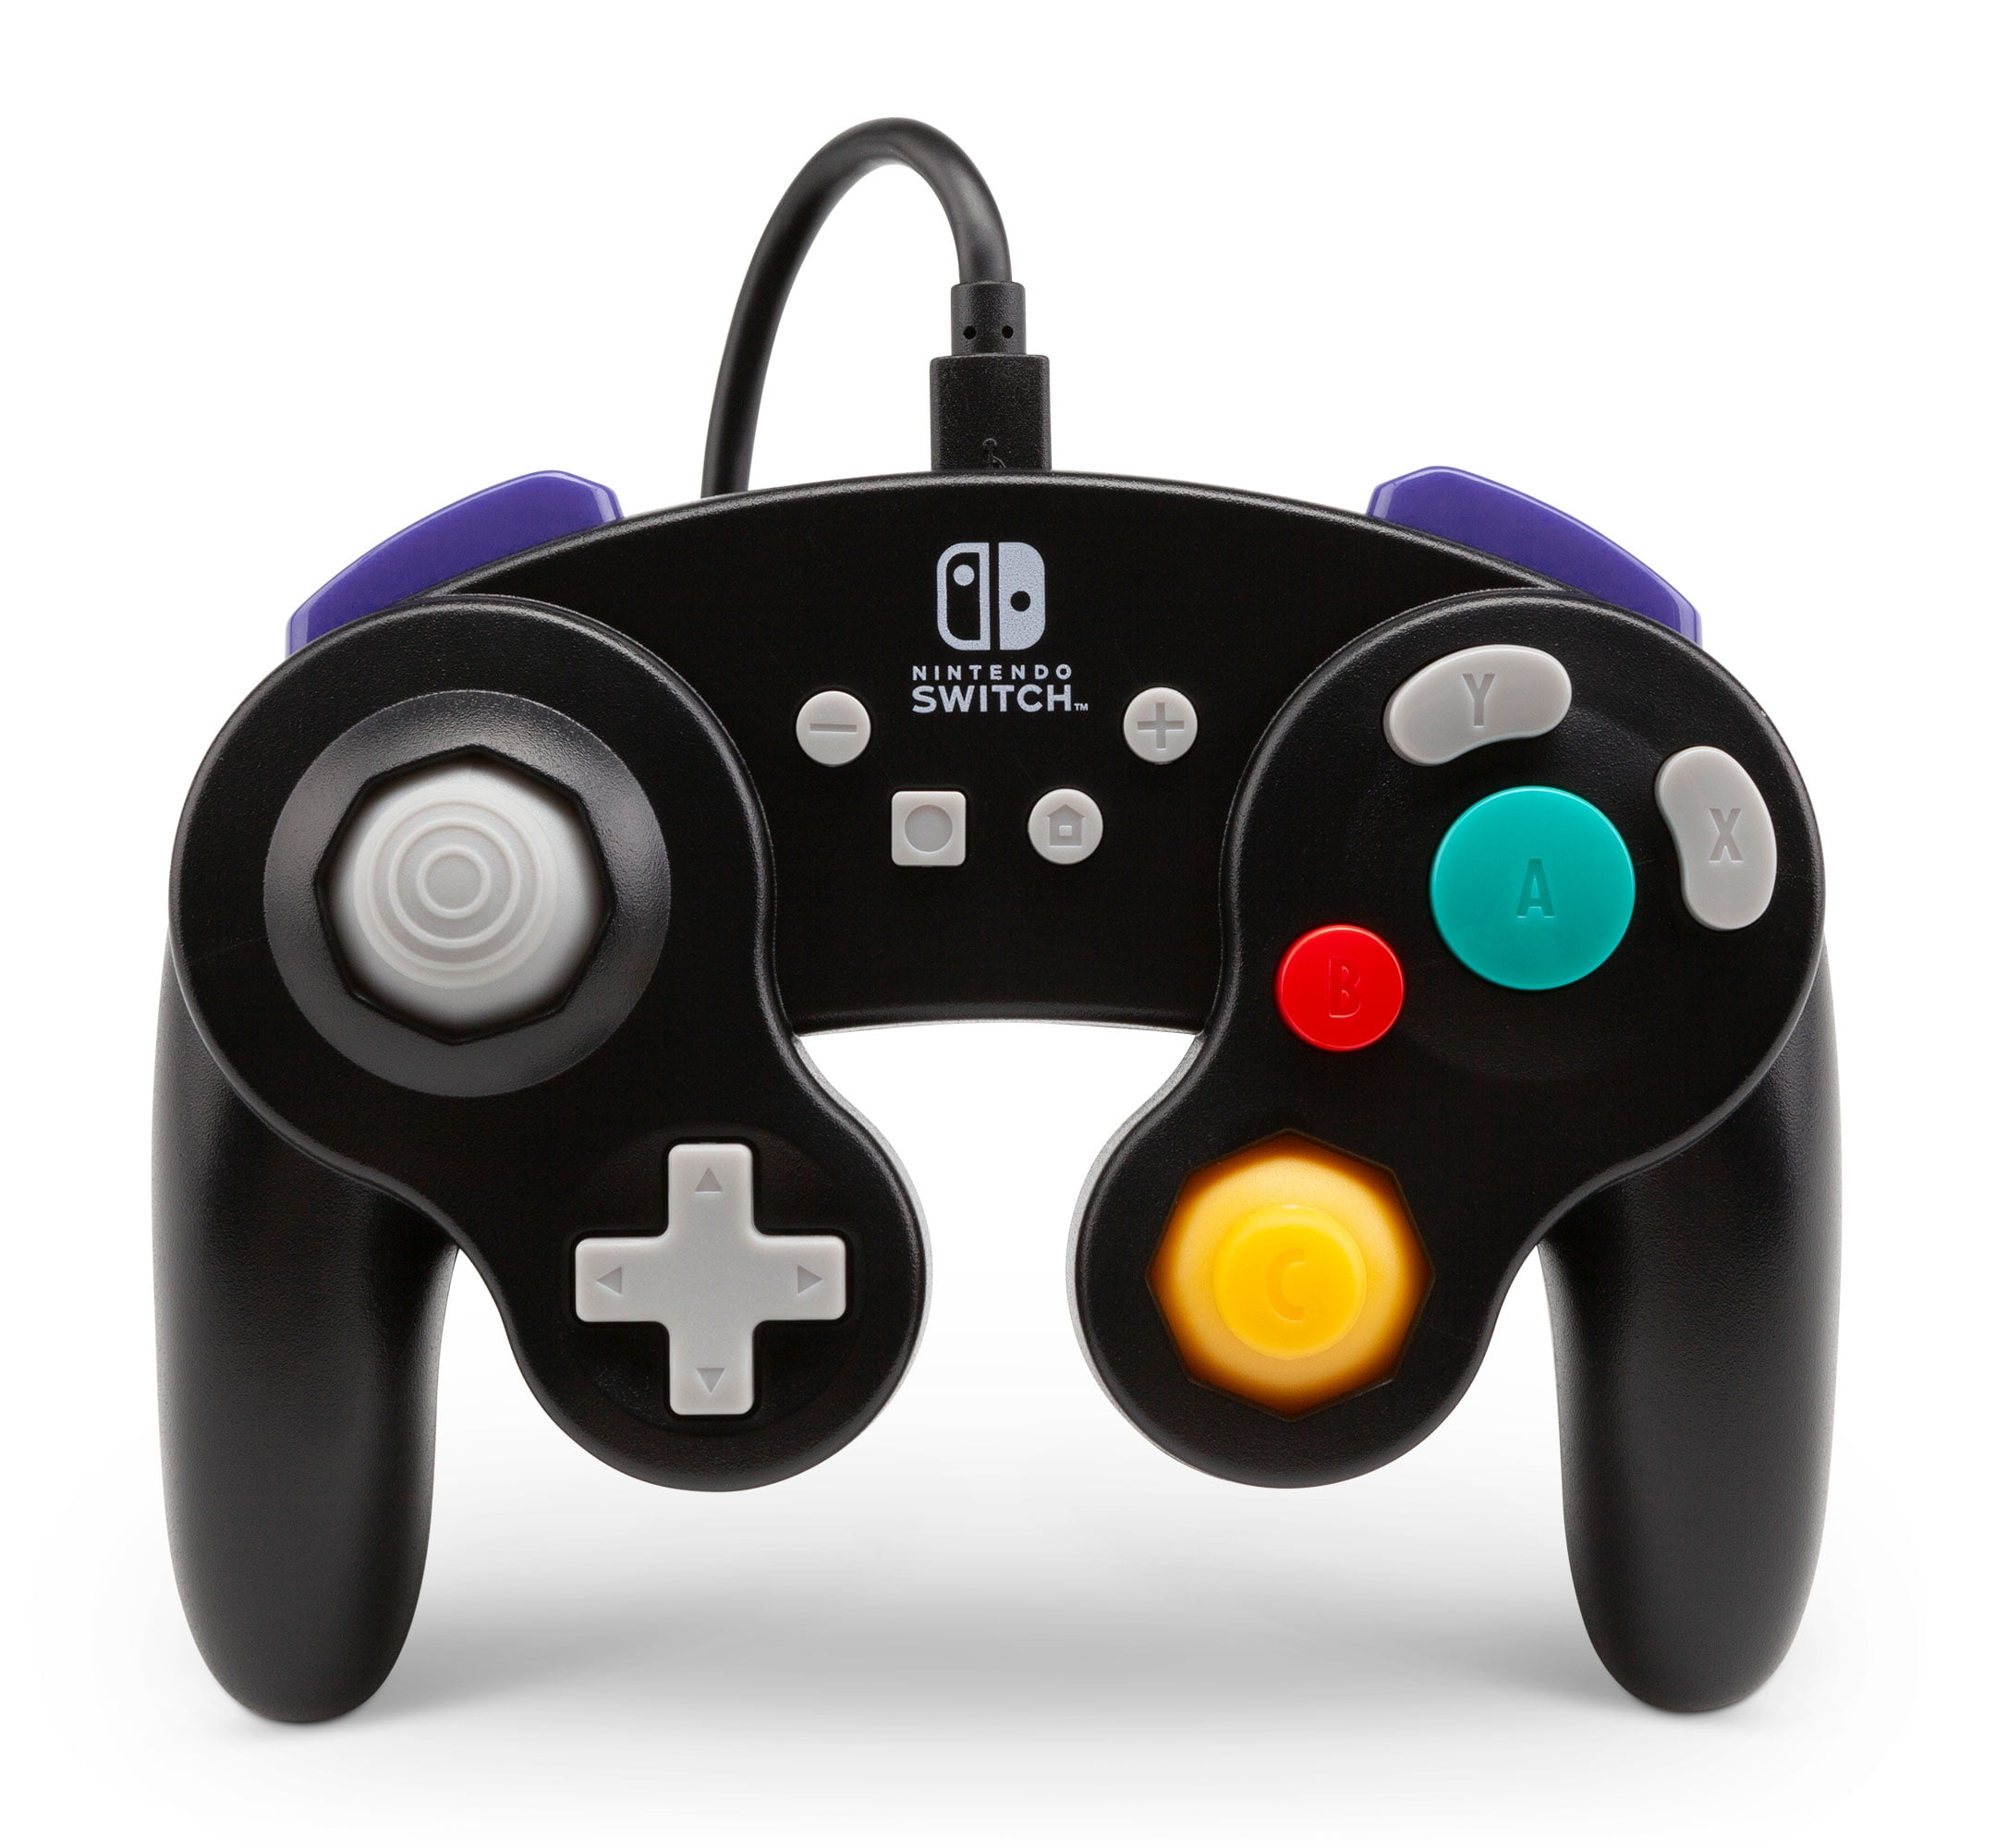 sommer råd Afsnit PowerA GameCube Style Wired Controller for Nintendo Switch - Black -  Walmart.com